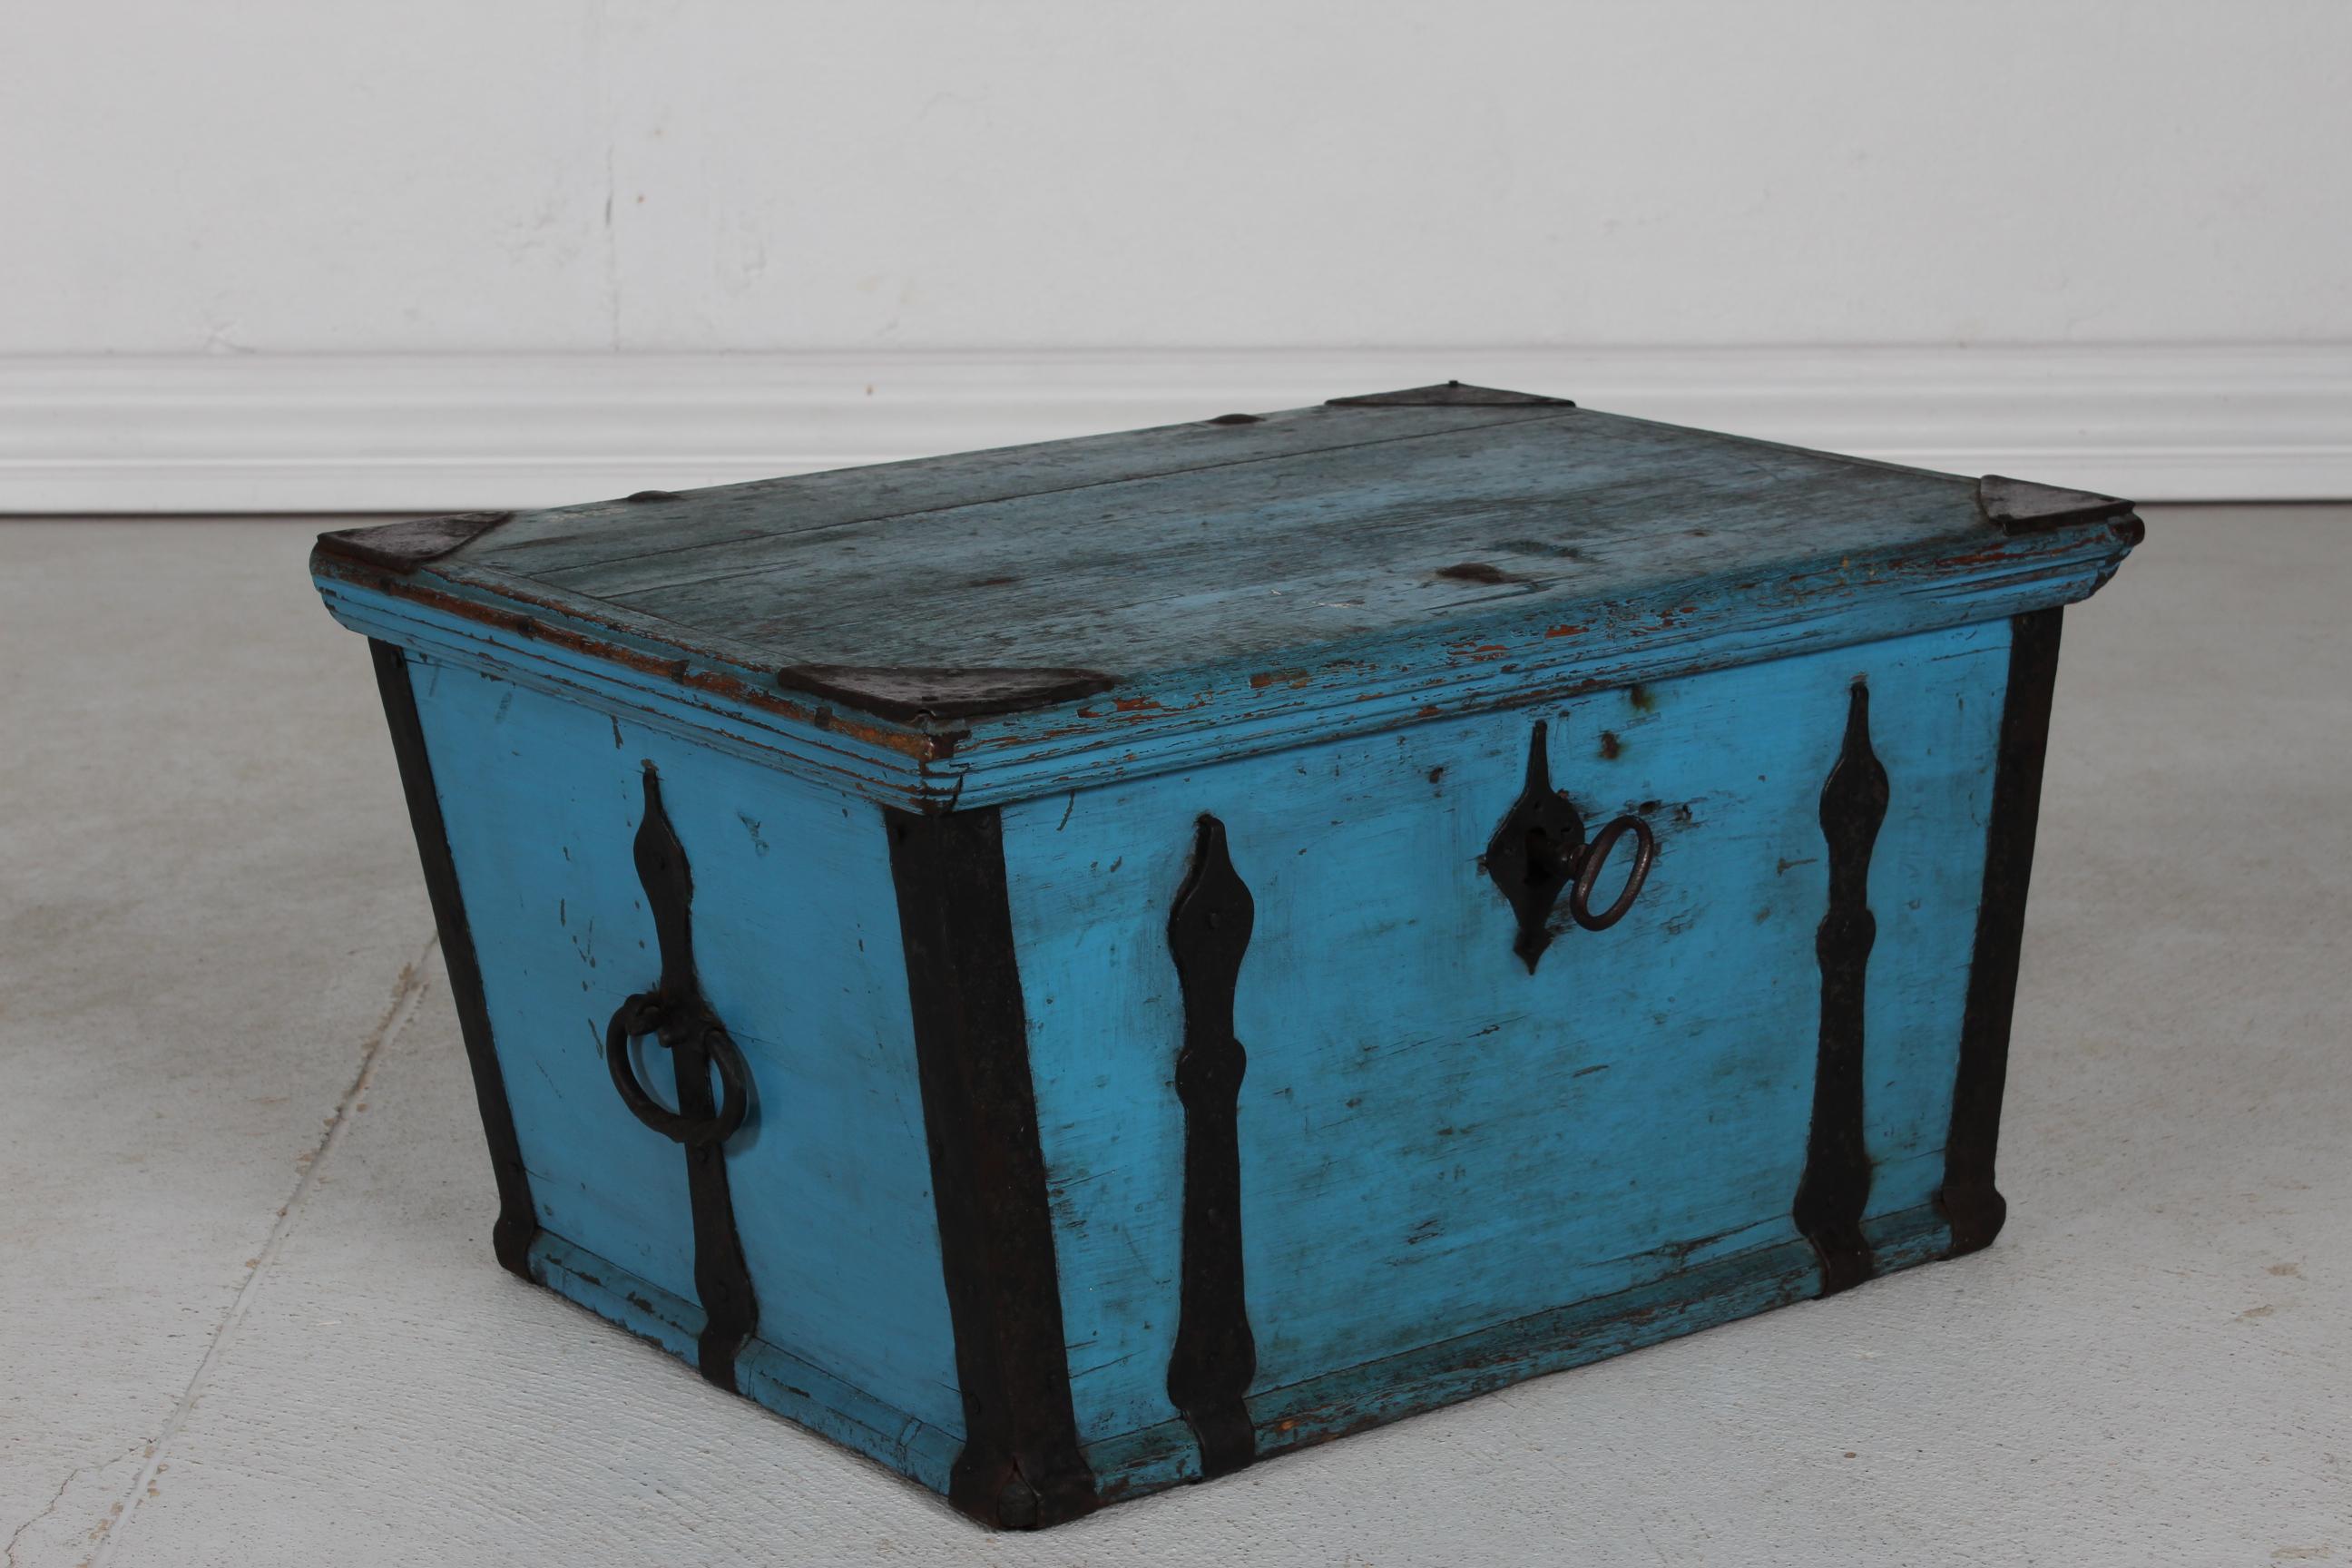 Antique Swedish campaign chest/storage box with plain top lid - can be used as a small table.
It's  made of pine wood with blue paint patinated after use and age.
The chest has a flat lid and iron fittings. The original old lock and  key is still